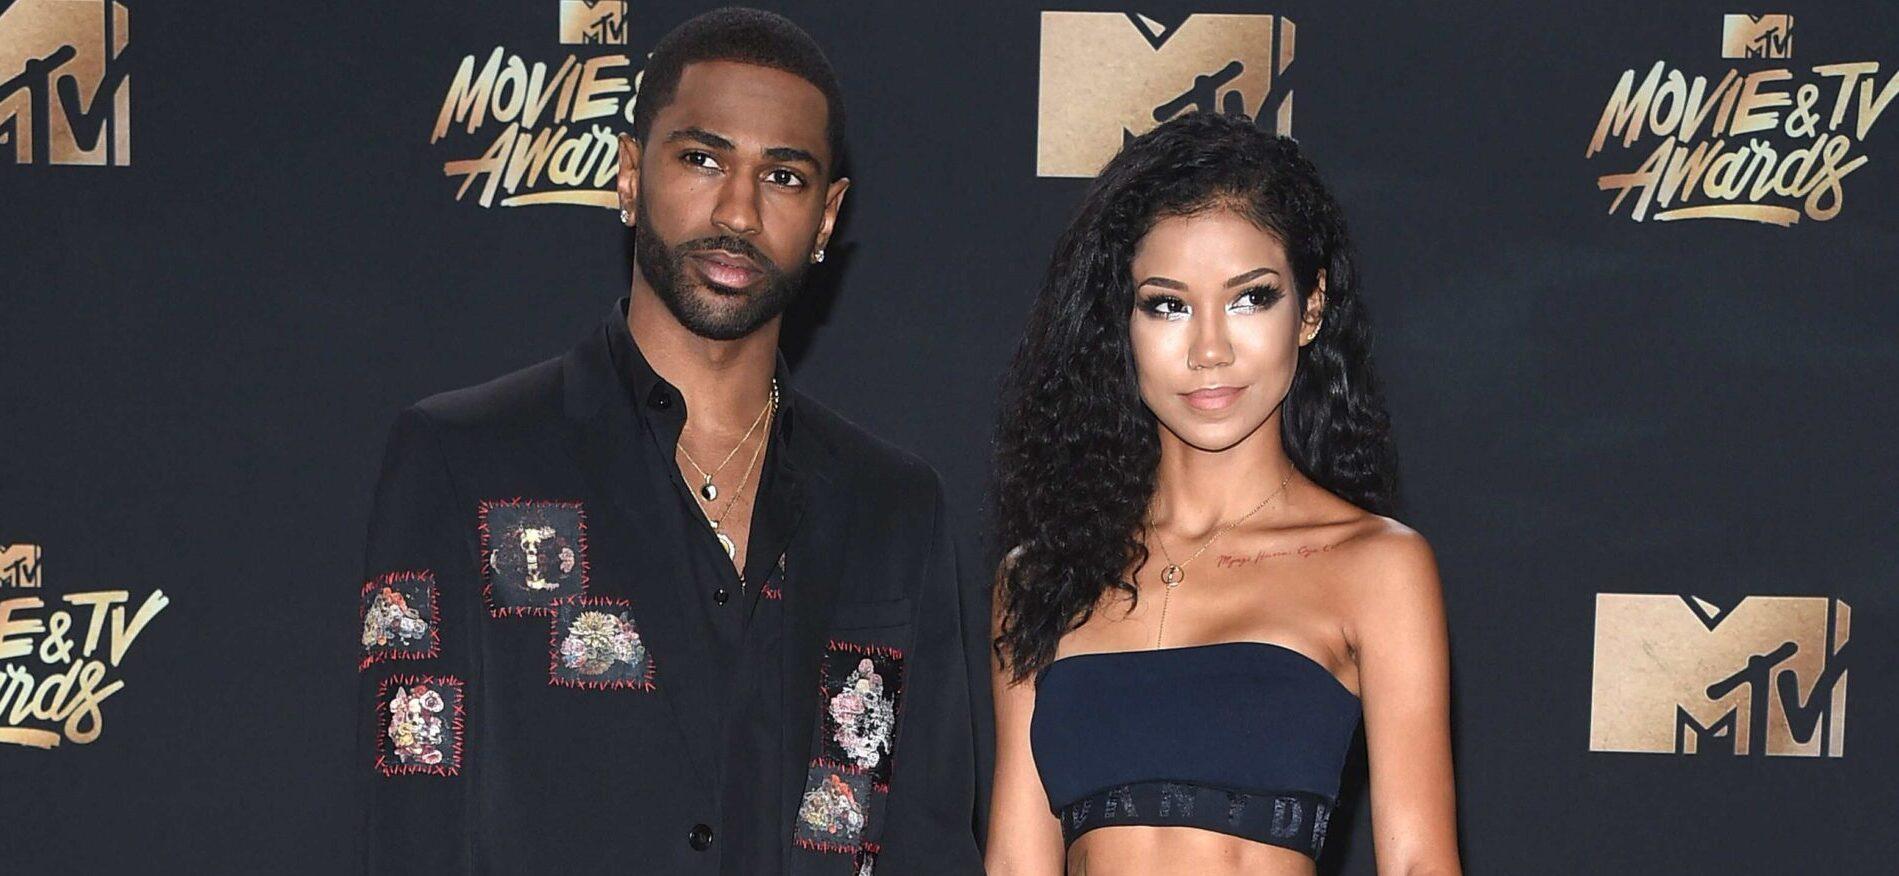 Jhene Aiko Sued For Allegedly Rear-Ending A Woman And Causing Injuries